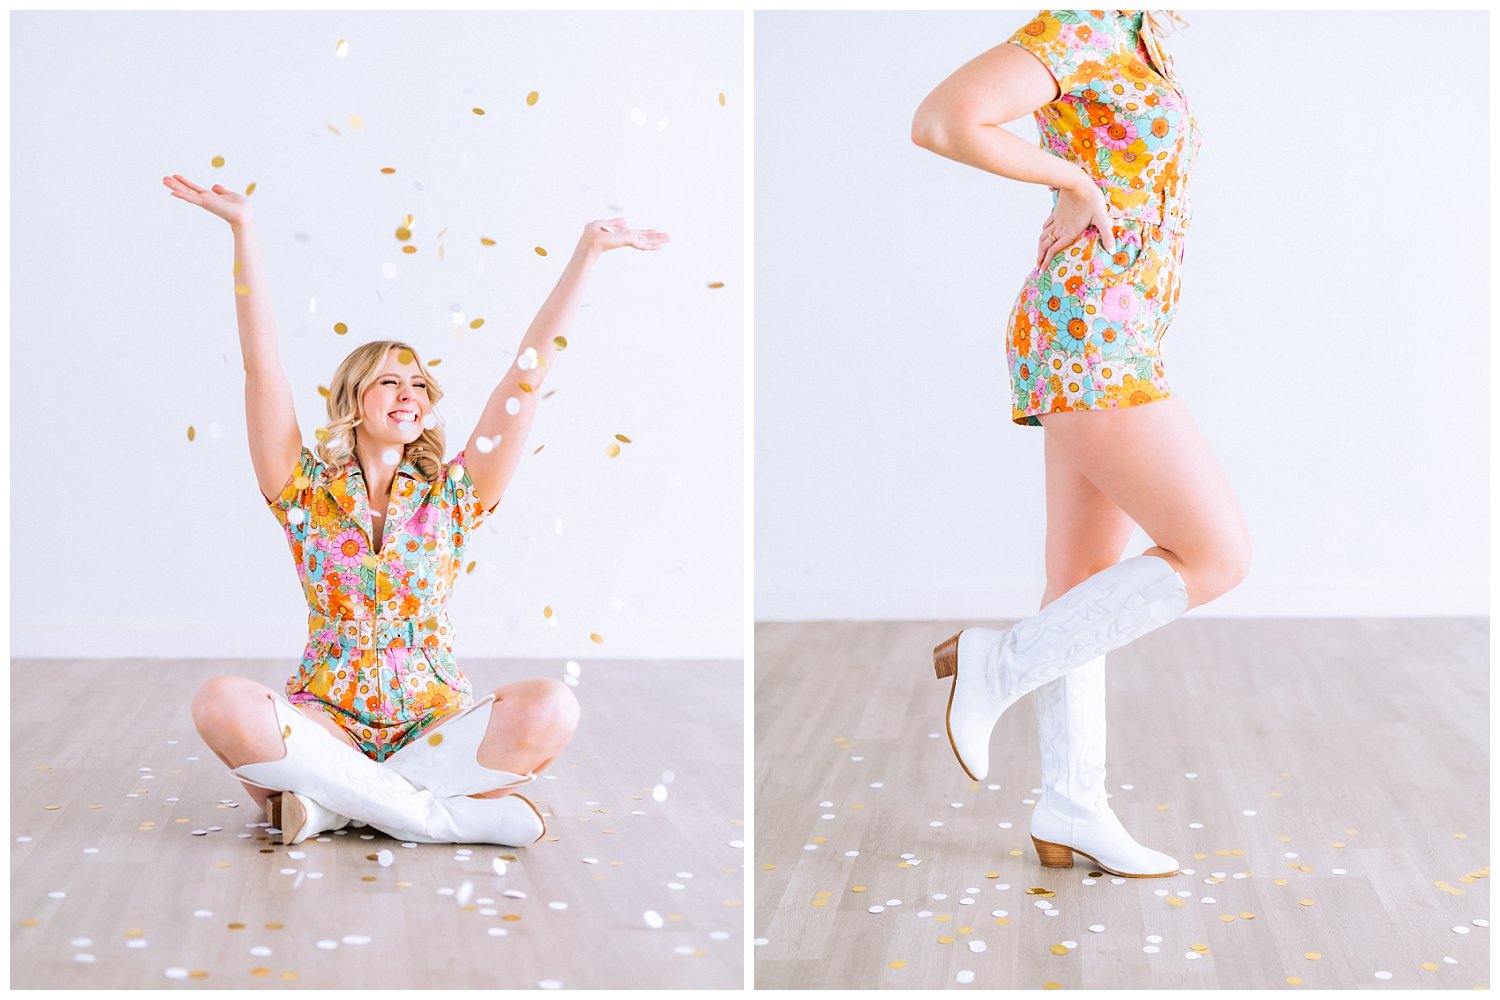 Colorful and youthful branding portrait session captured by Richmond Brand Photographer Heather Dodge